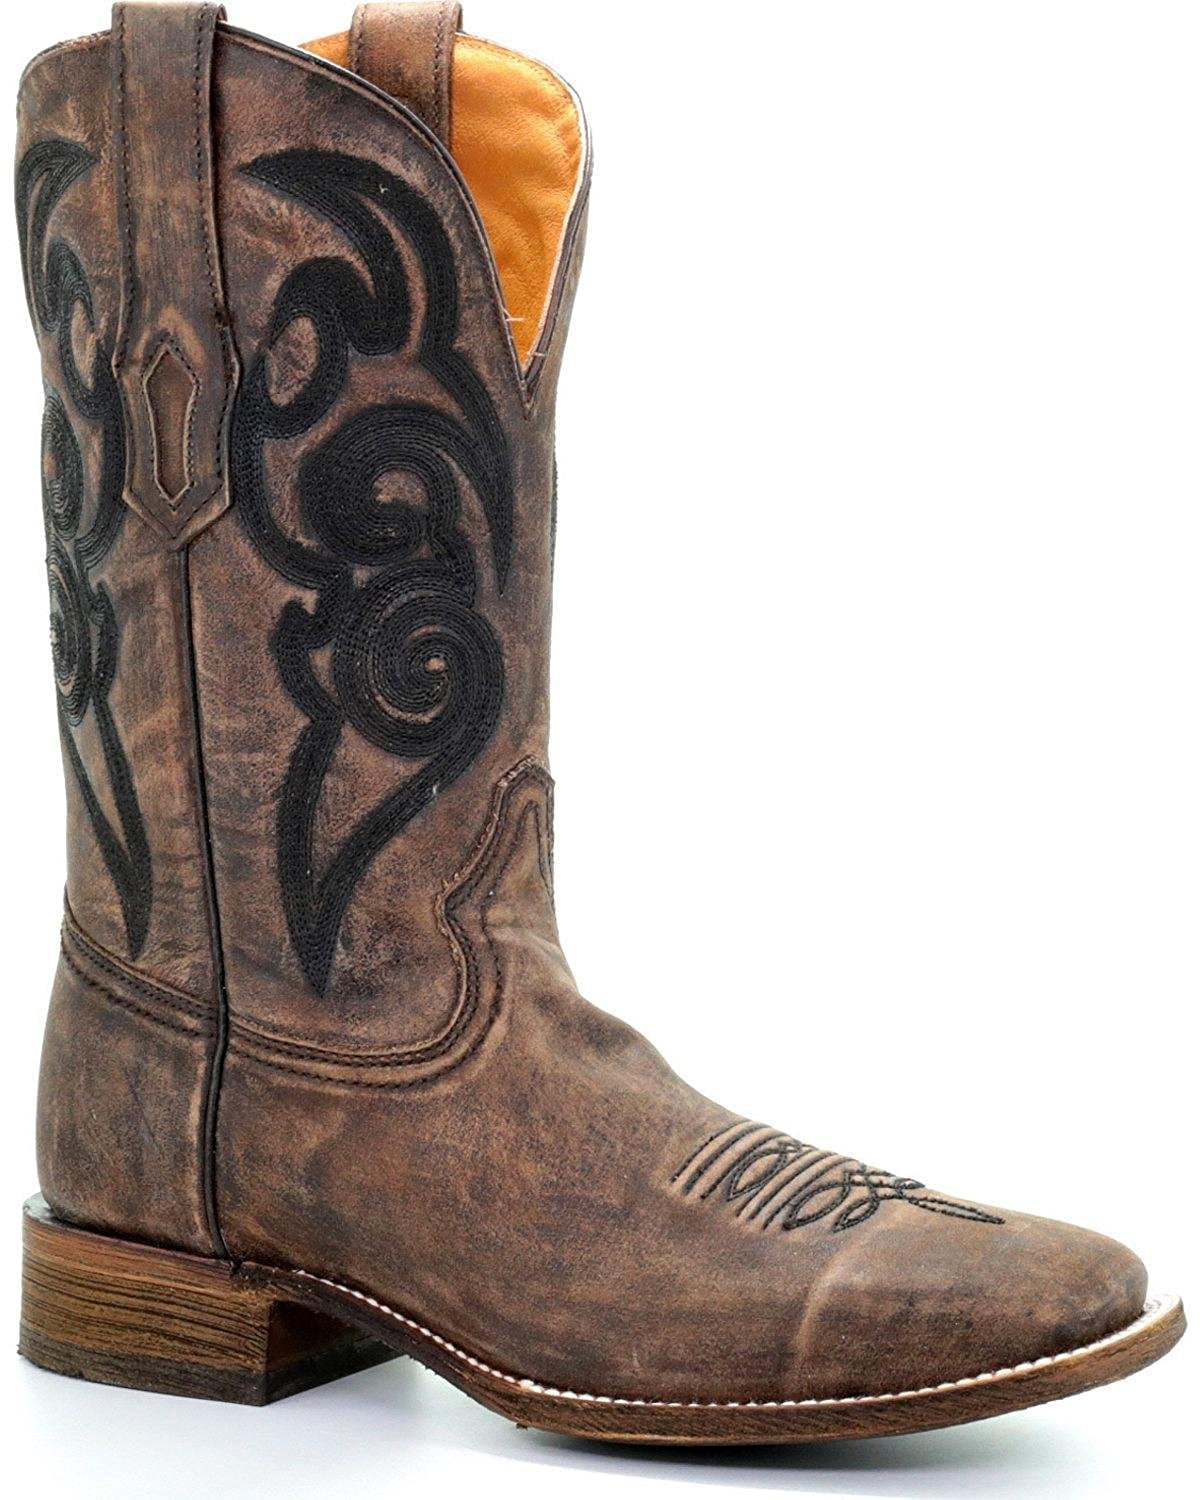 CORRAL Men's Brown Overlay Square Toe Cowboy Boots R1432 